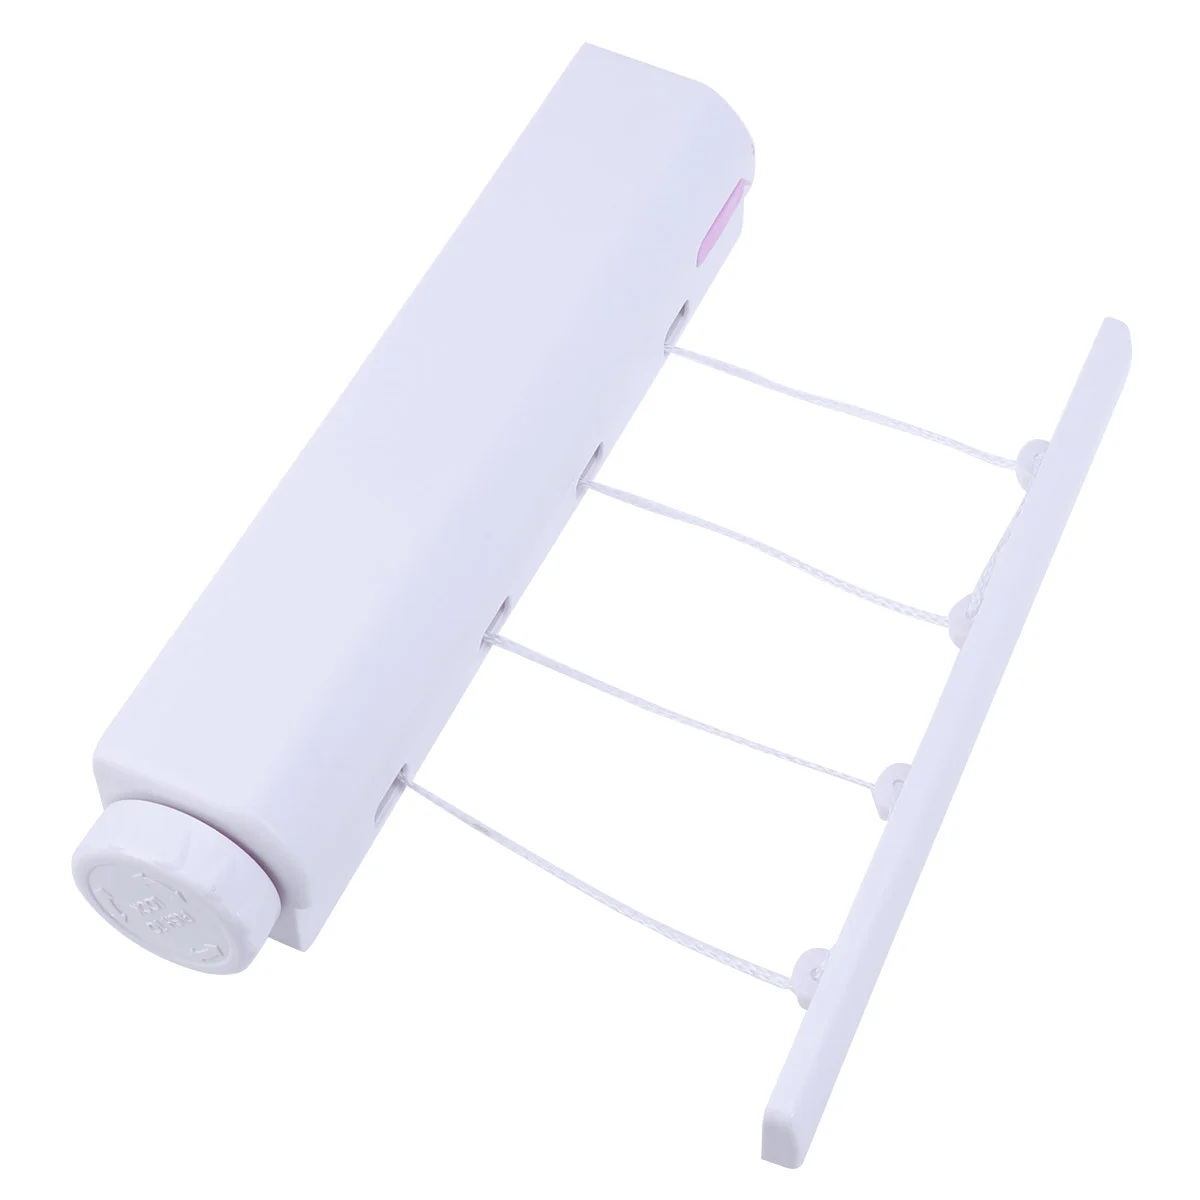 

Retractable Clothesline 4-Line Clothes Drying Rack Portable Laundry Dryer for Indoor and Outdoor Use (Random Color)